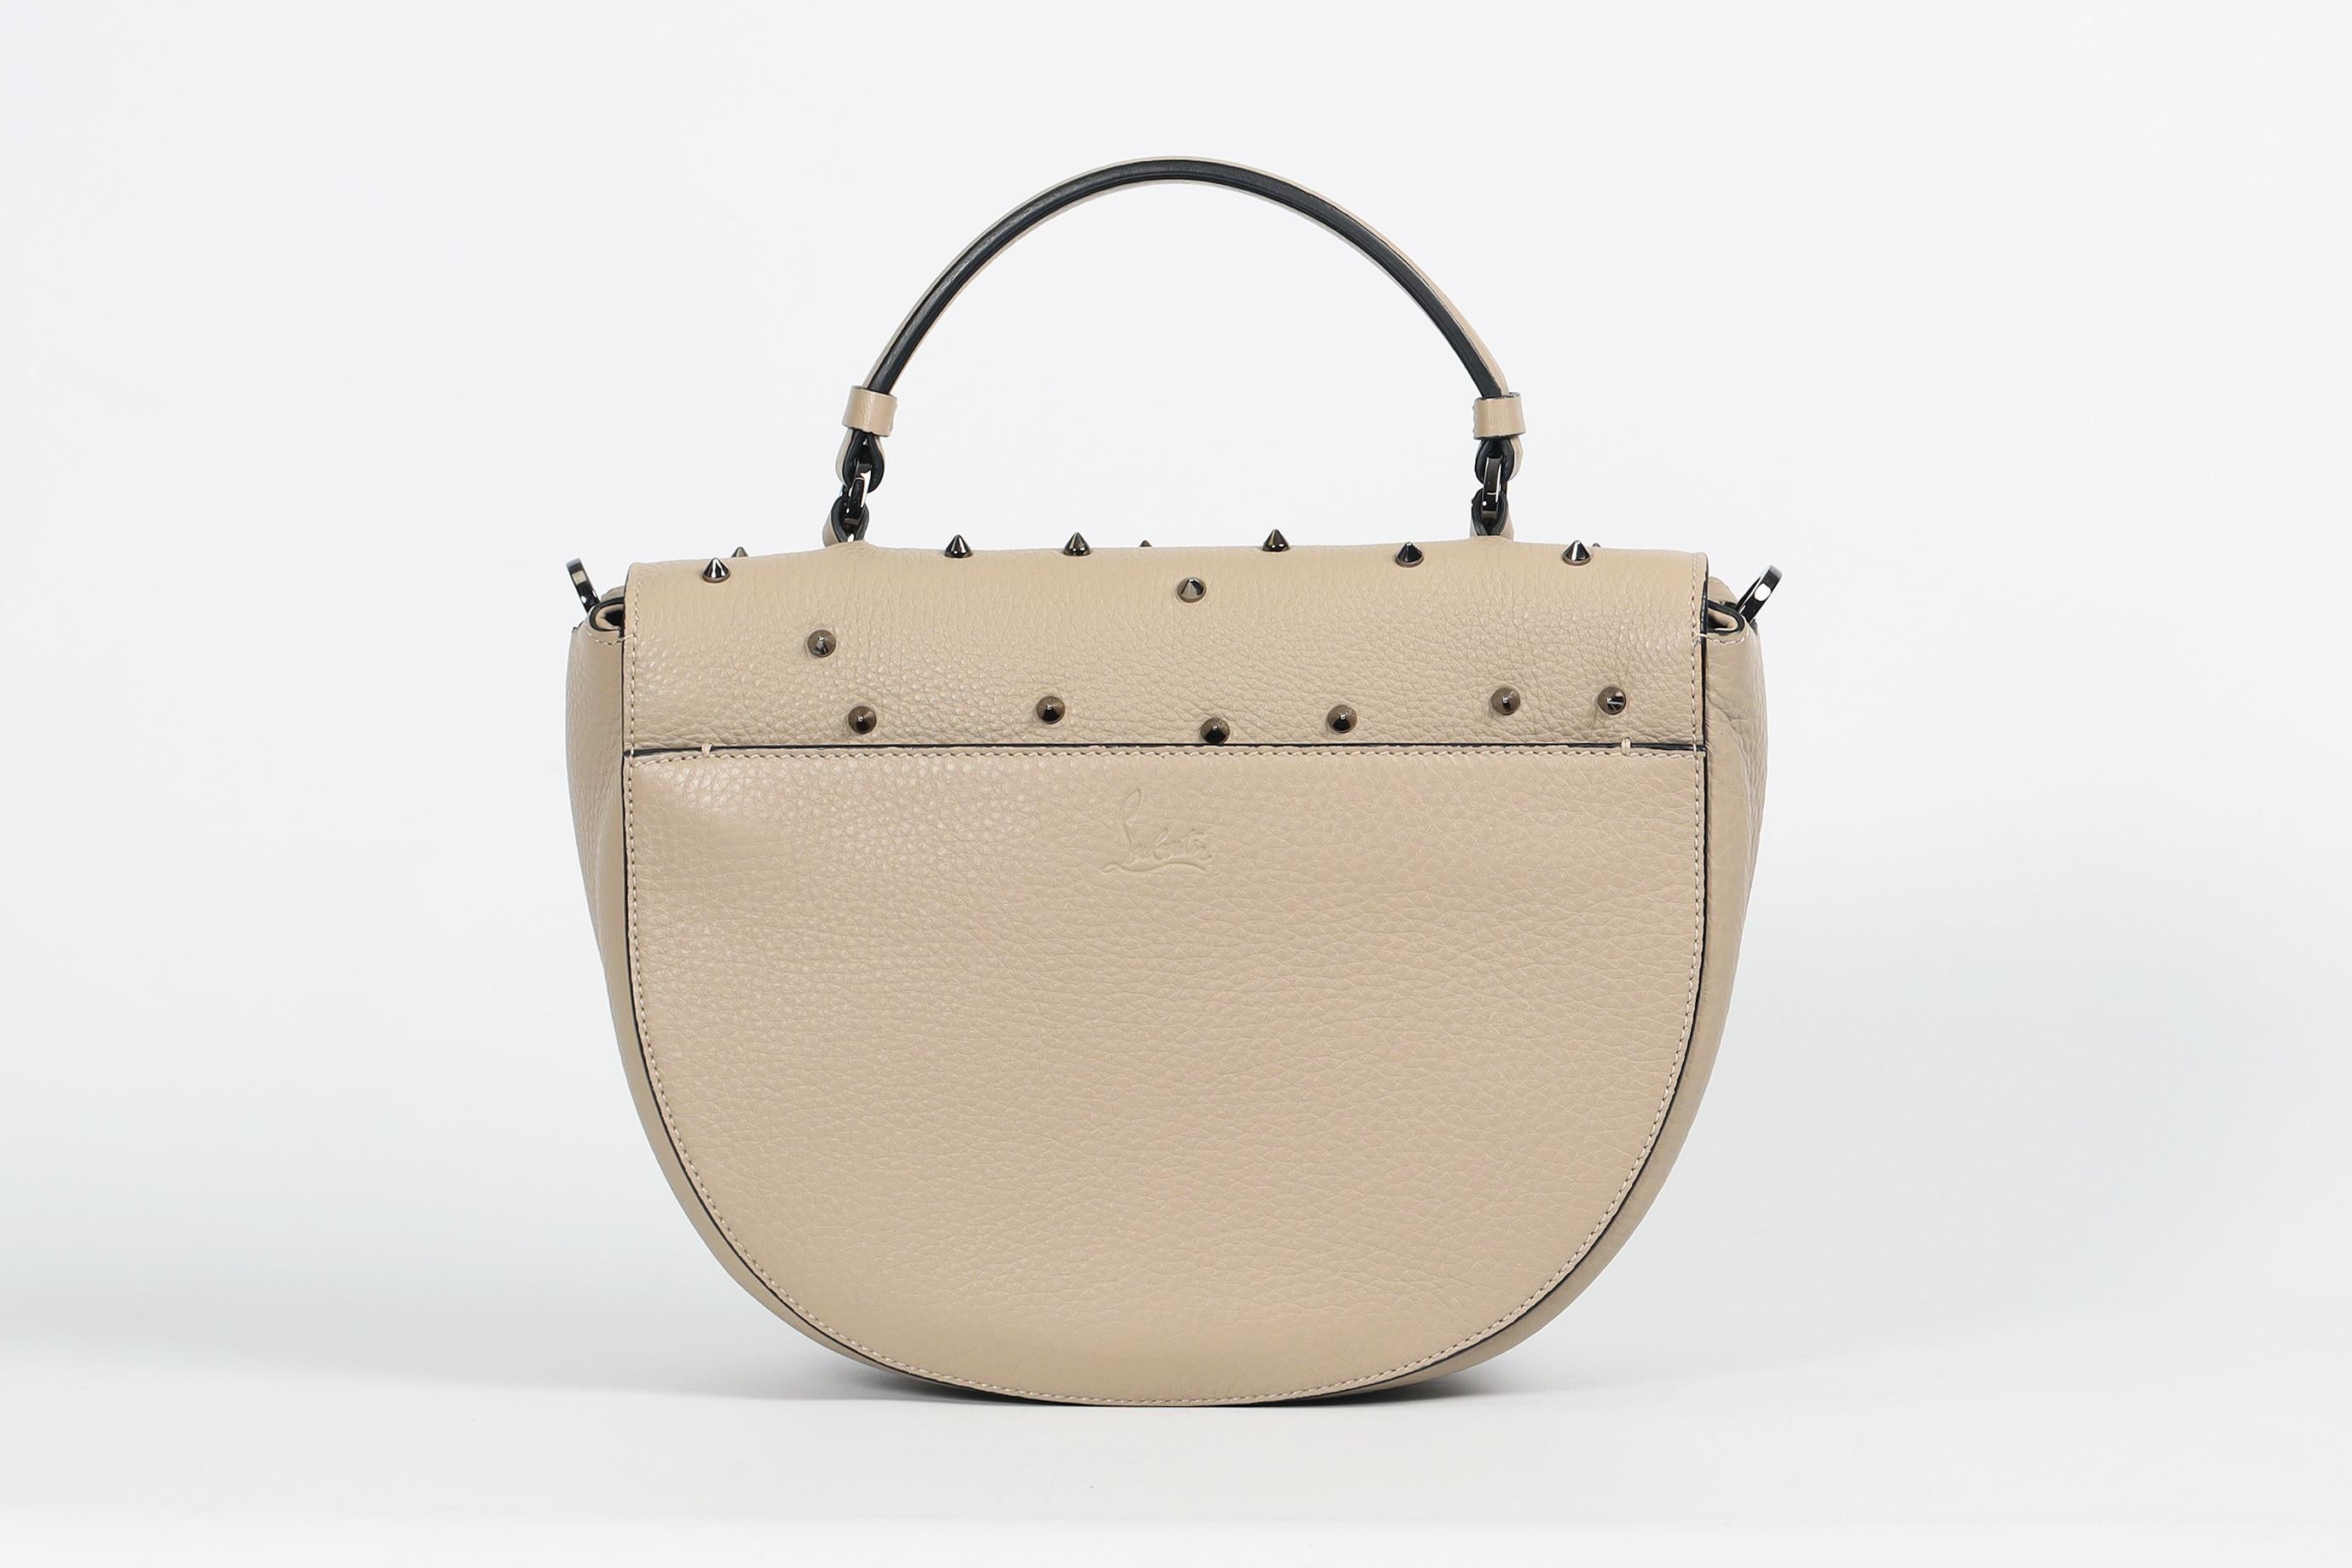 Christian Louboutin Panettone Spiked Leather Shoulder Bag For Sale 1